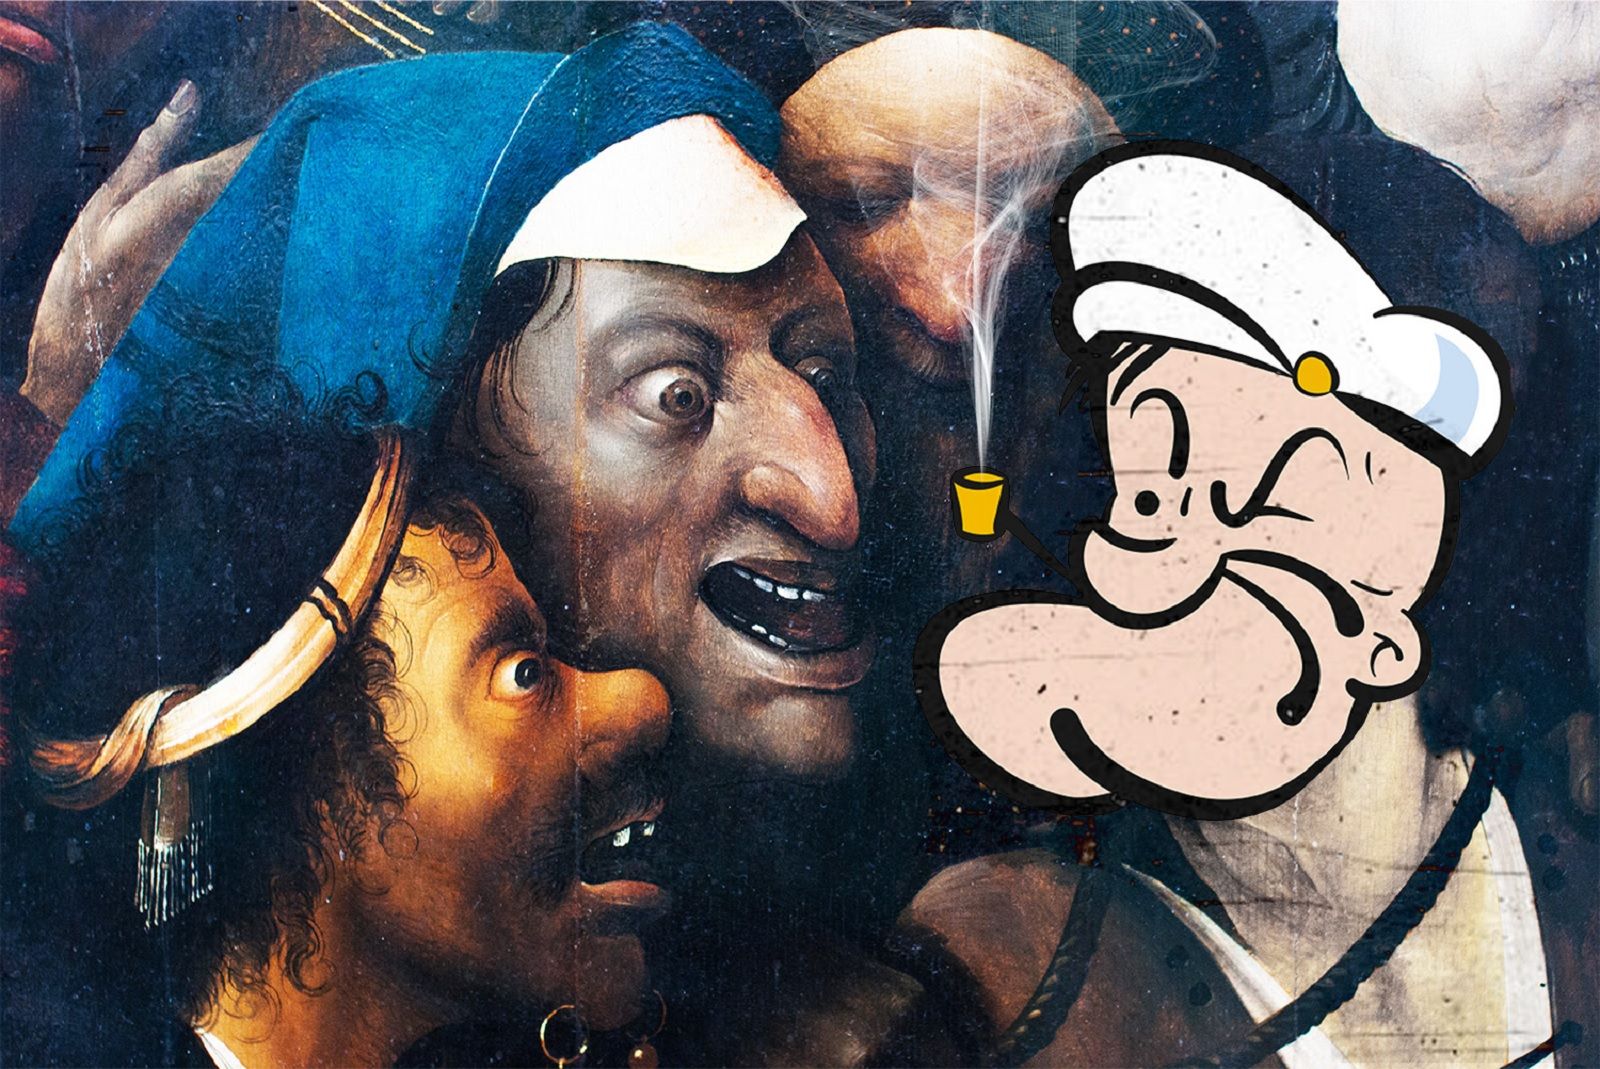 Amusing Images Of Cartoon Characters In Photoshopped Into Renaissance Paintings photo 10